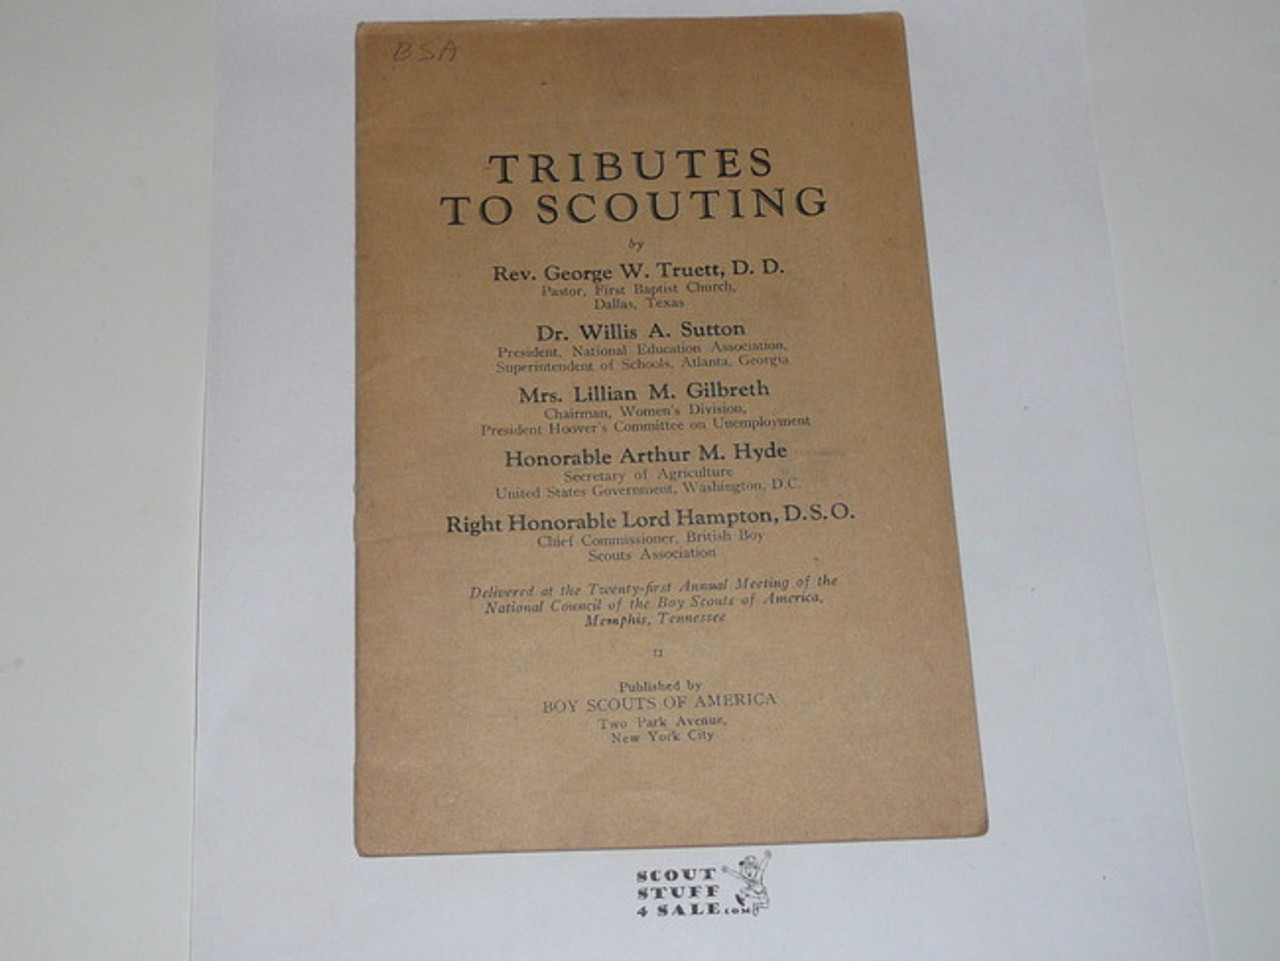 1931 Tributes to Scouting presented at 21st Annual Meeting of the National Council of the Boy Scouts of America, Rarest Boy Scout Service Library Title by far